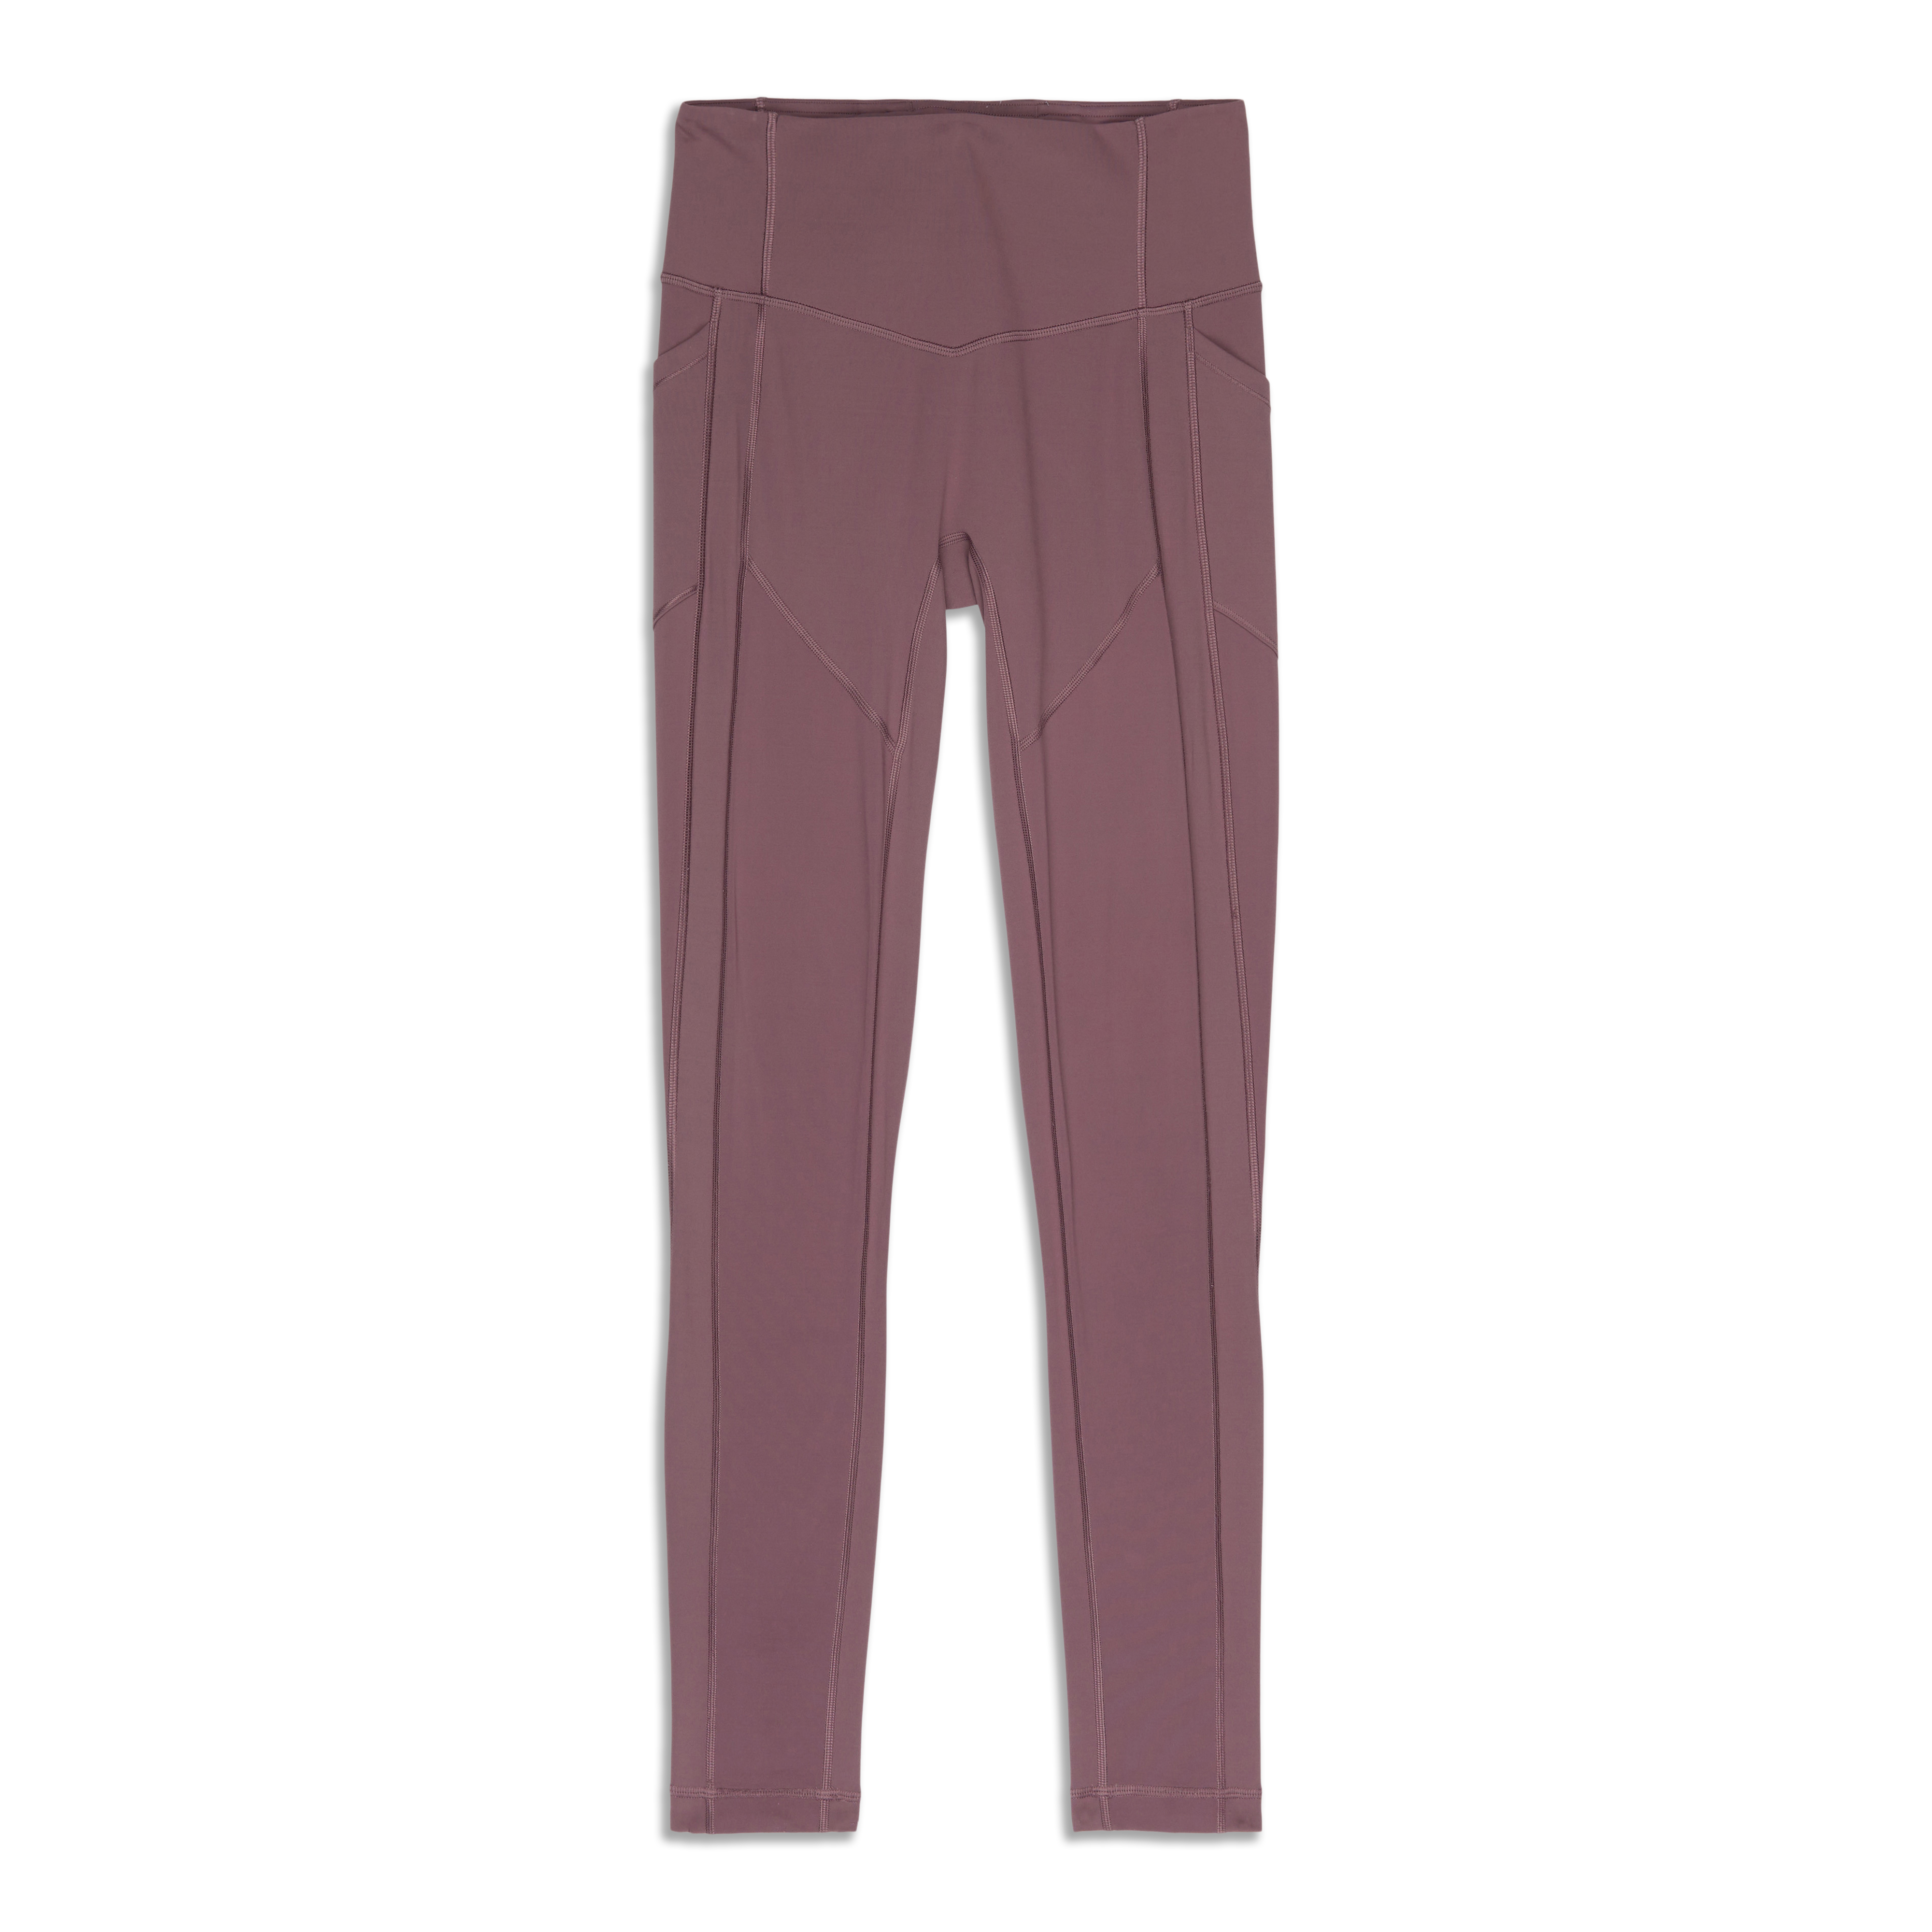 Lululemon All The Right Places Pant